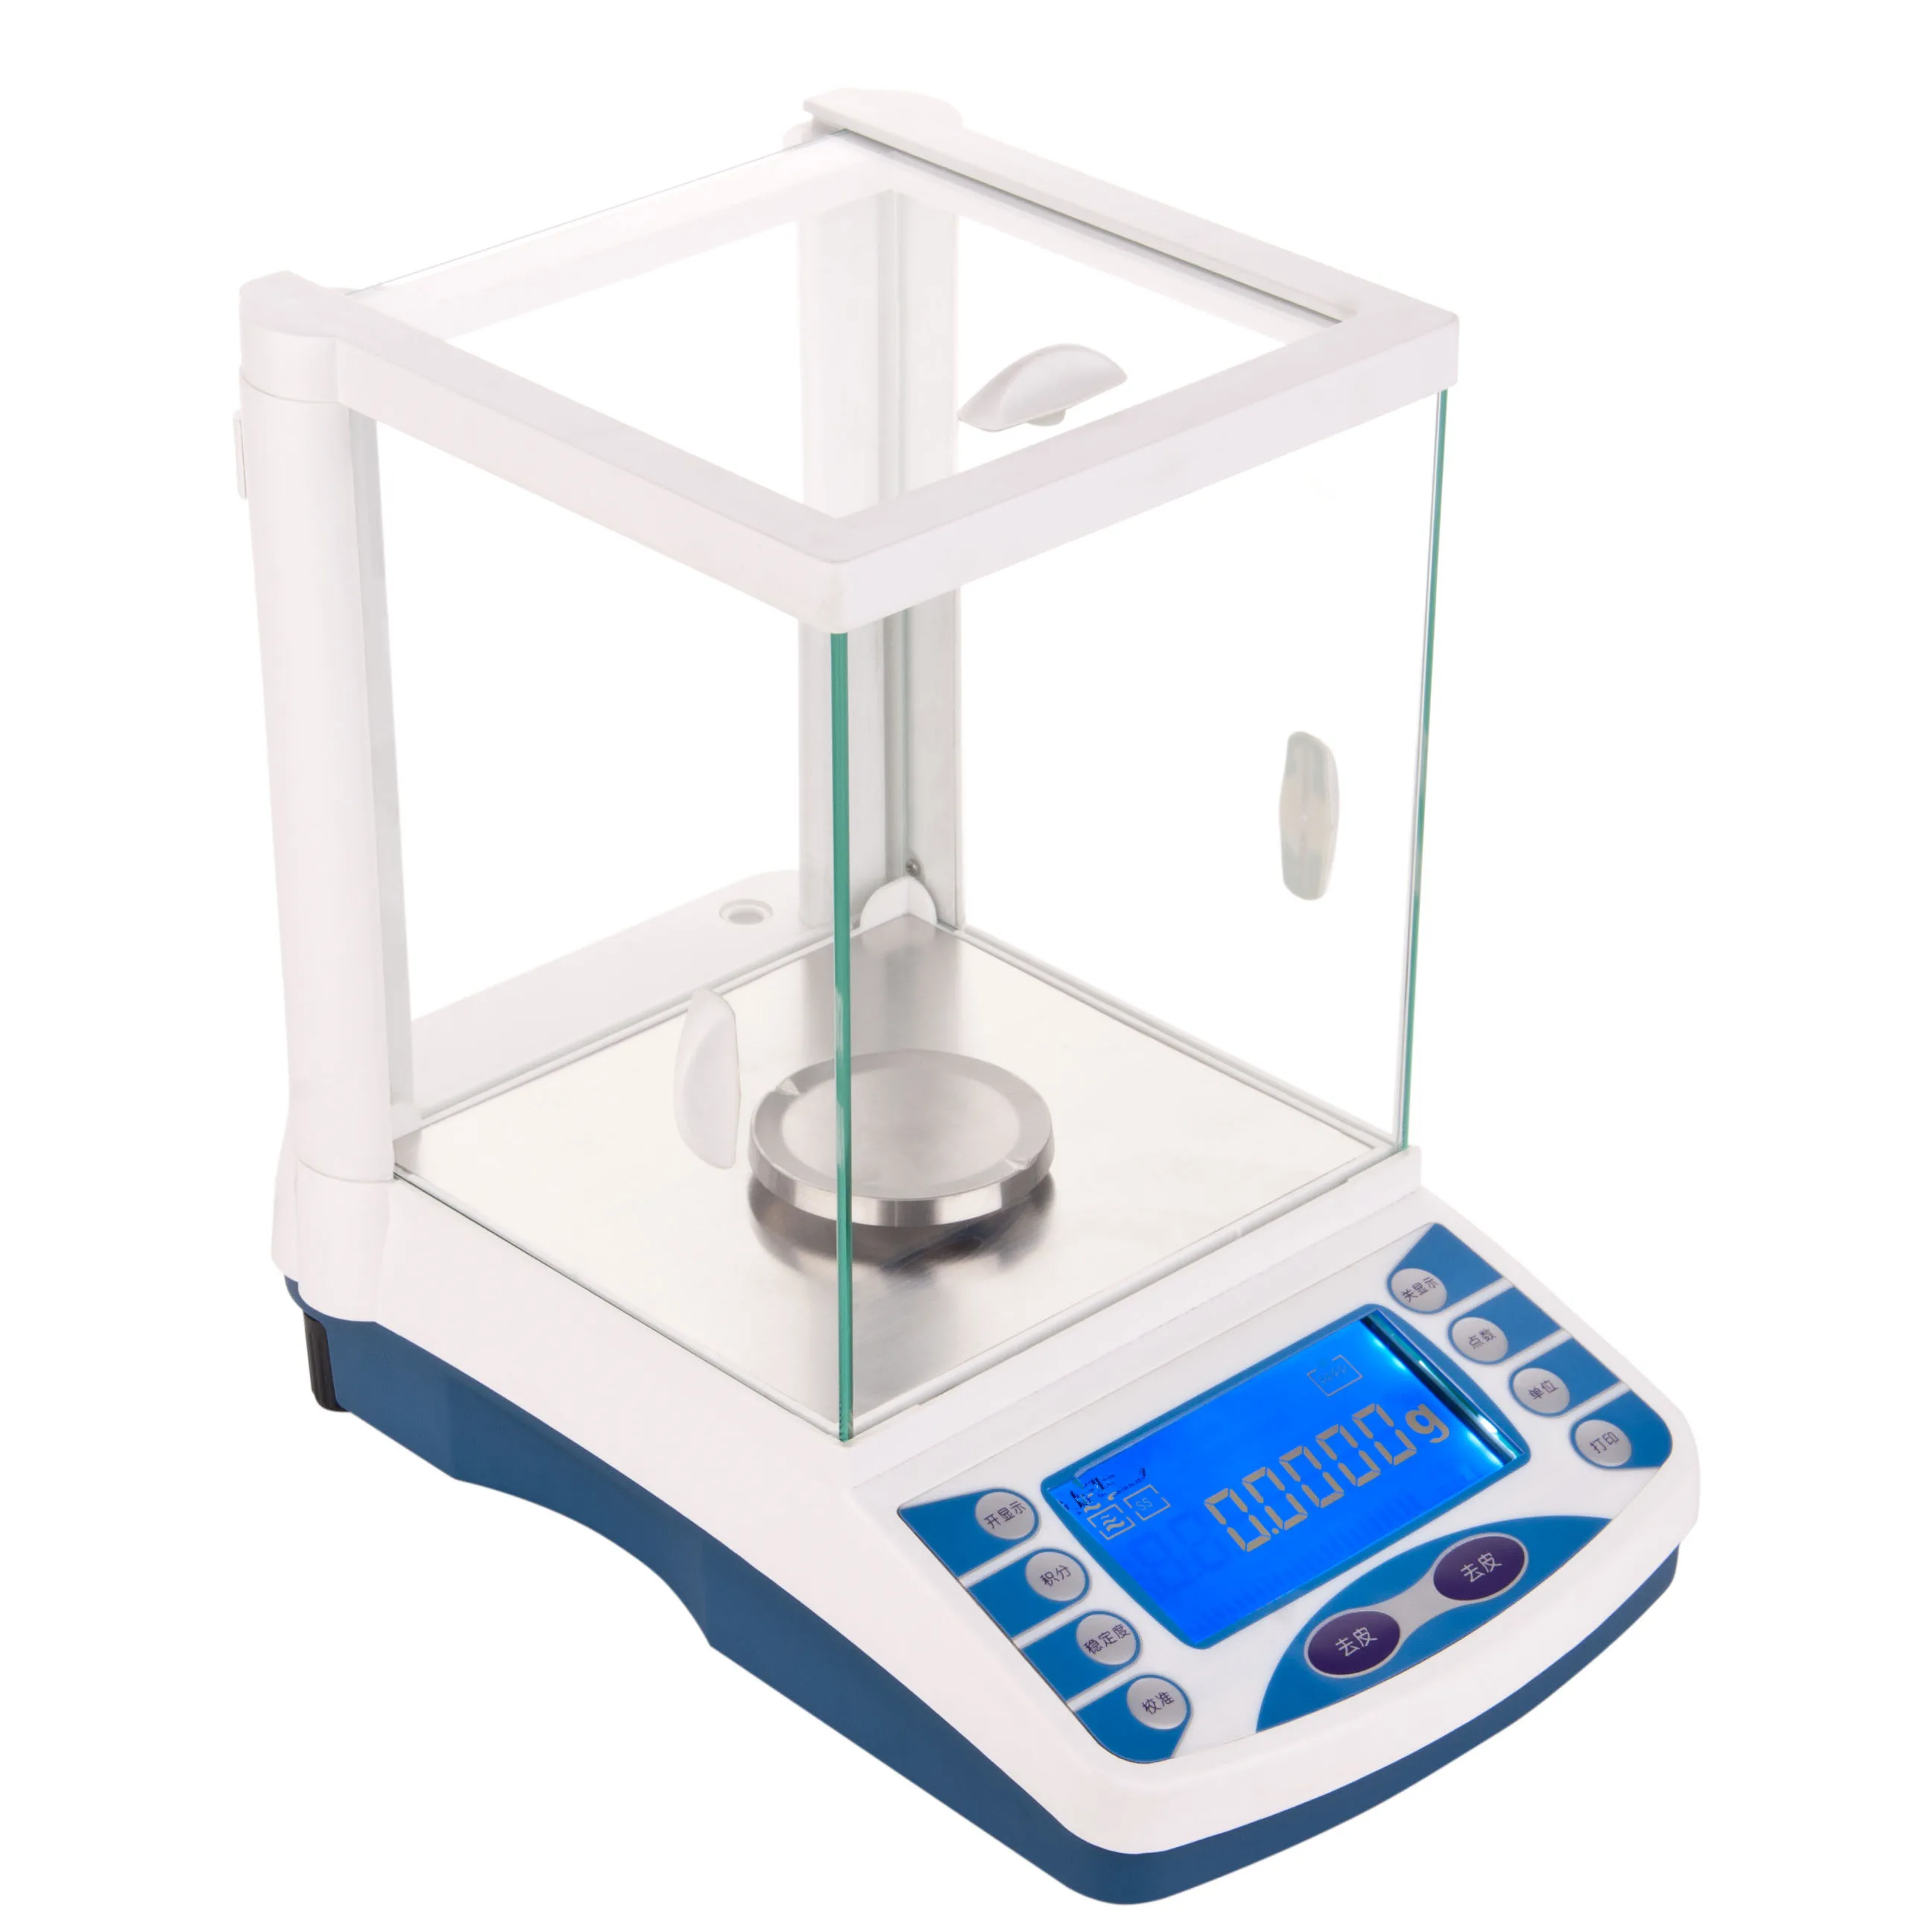 

Internal Calibration Electric Weighing Scale/Electronic Analytical Balance/ Lab Precise Balance Cheap Price - MSLYK Series